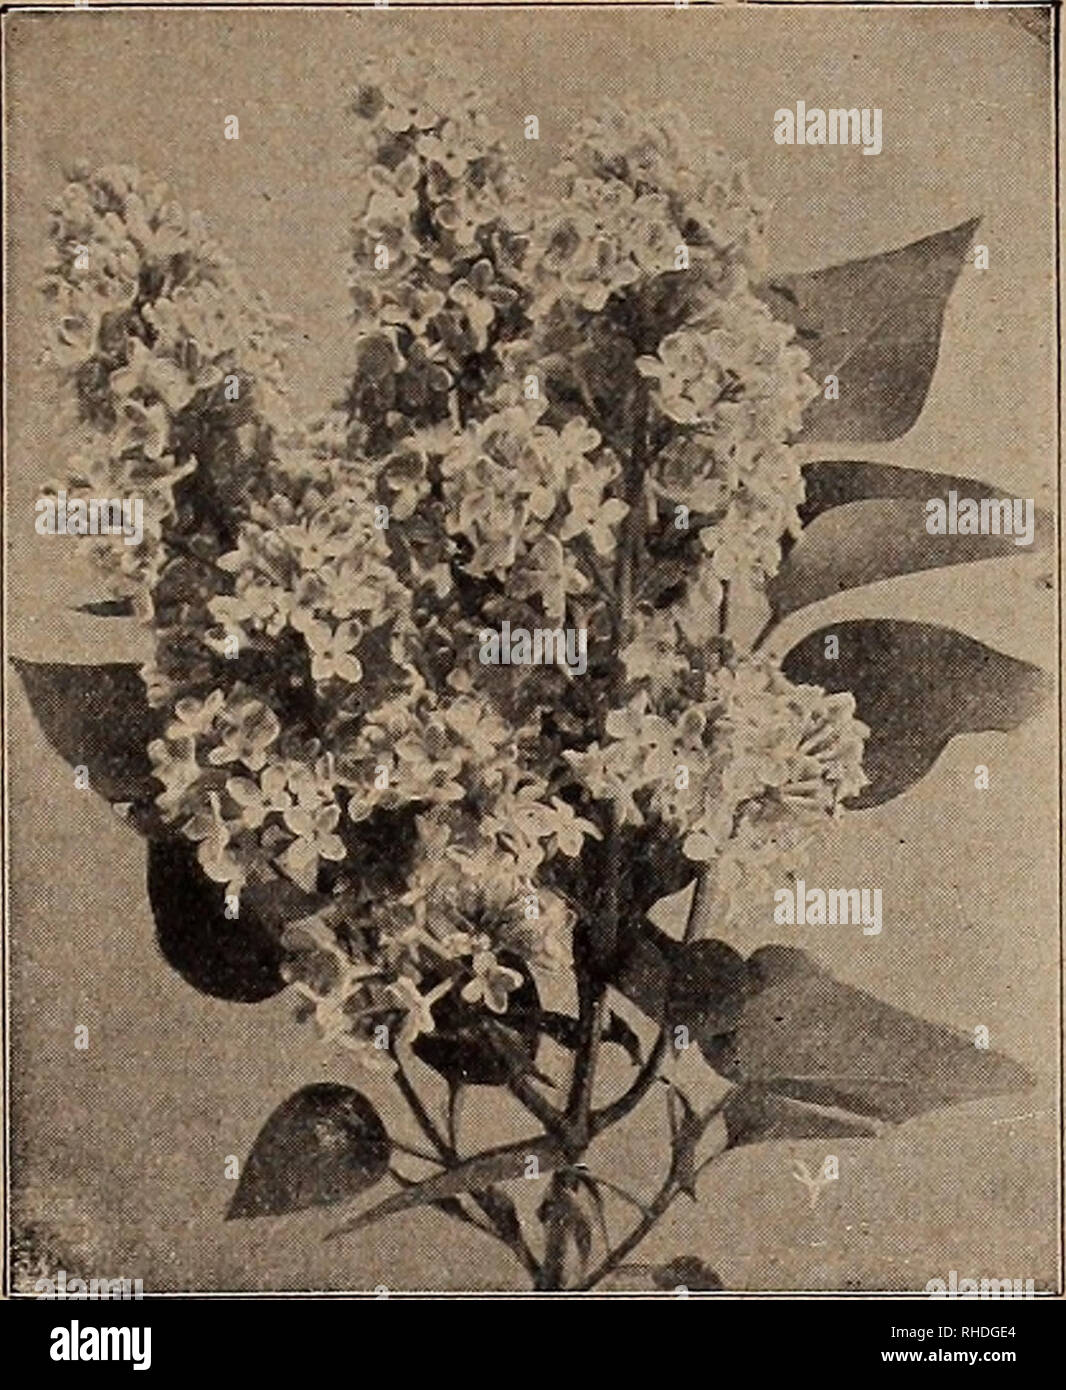 . Book for florists. Flowers Seeds Catalogs; Bulbs (Plants) Seedlings Catalogs; Vegetables Seeds Catalogs; Trees Seeds Catalogs; Horticulture Equipment and supplies Catalogs. SNOWBERRY (Symphoricarpos Racemosus} ORNAMENTAL AND FLOWERING SHRUBS—Continued PYRACANTHA Coccinea Lalandi (Laland Firethorn), Each 15 to 18 in. B &amp; B $1.00 RHAMNUS Cathartica (Buck Thorn). 3 to 4 ft 30 4 to 5 ft 35 Frangula. 3 to 4 ft 30 4 to 5 ft 40 RHODOTYPOS Kerrioides. 2 to 3 ft 40 3 to 4 ft 50 RHUS Canadensis. 18 to 24 in 50 2 to 3 ft 60 Cotinus. 3 to 4 ft 1.00 Typhina Laciniata (Cut-leaved). 3 to 4 ft 40 4 to 5 Stock Photo